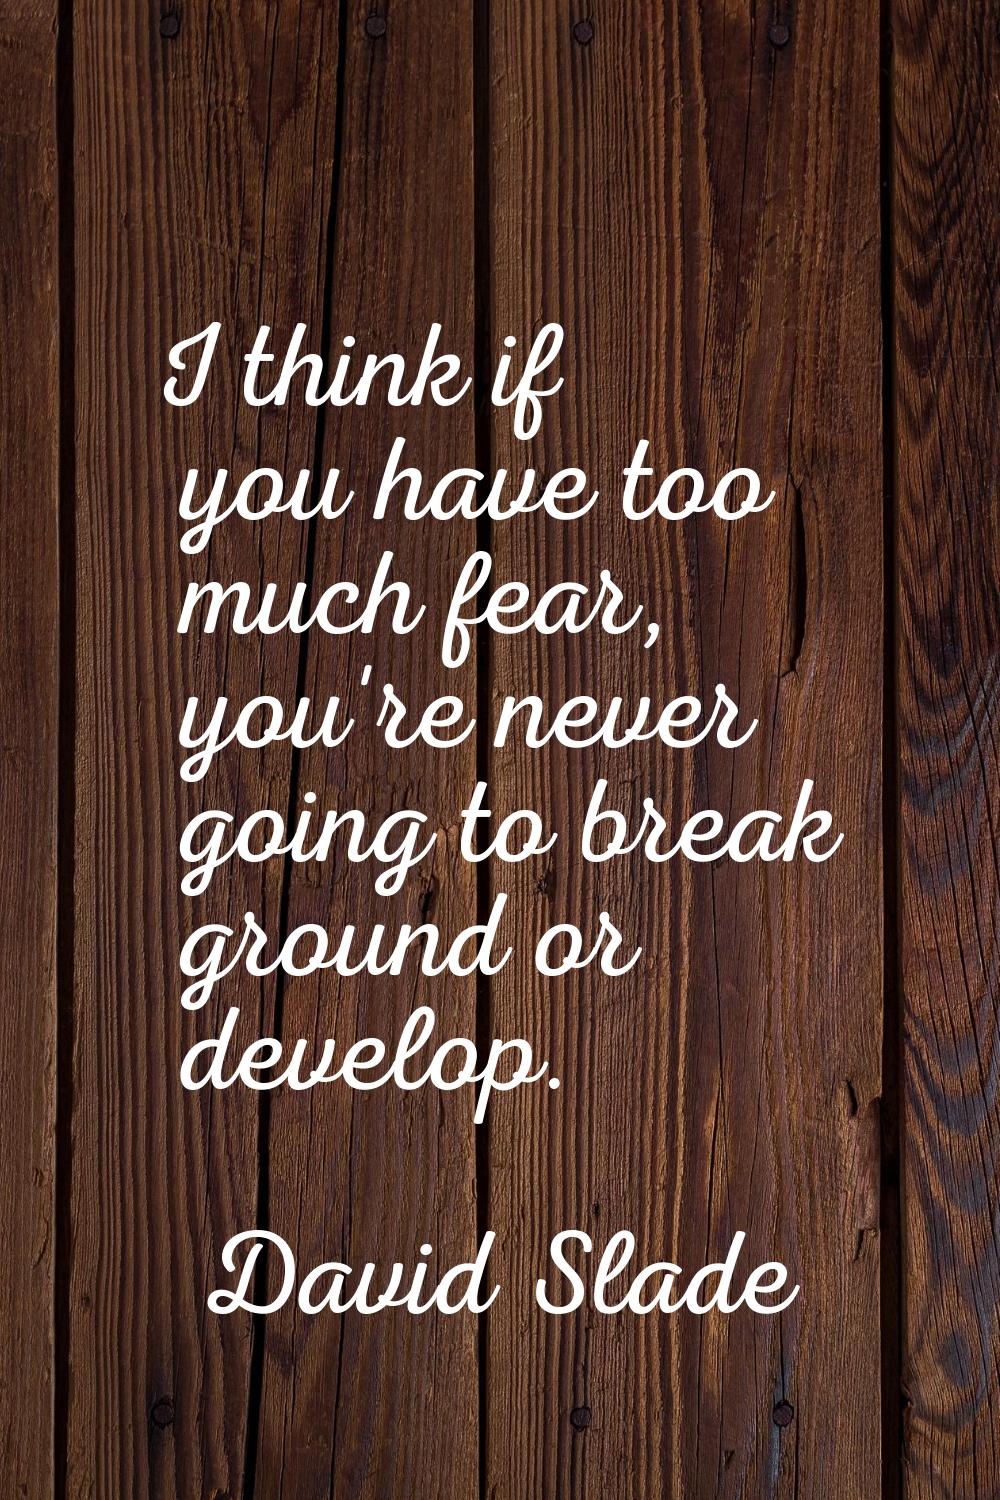 I think if you have too much fear, you're never going to break ground or develop.